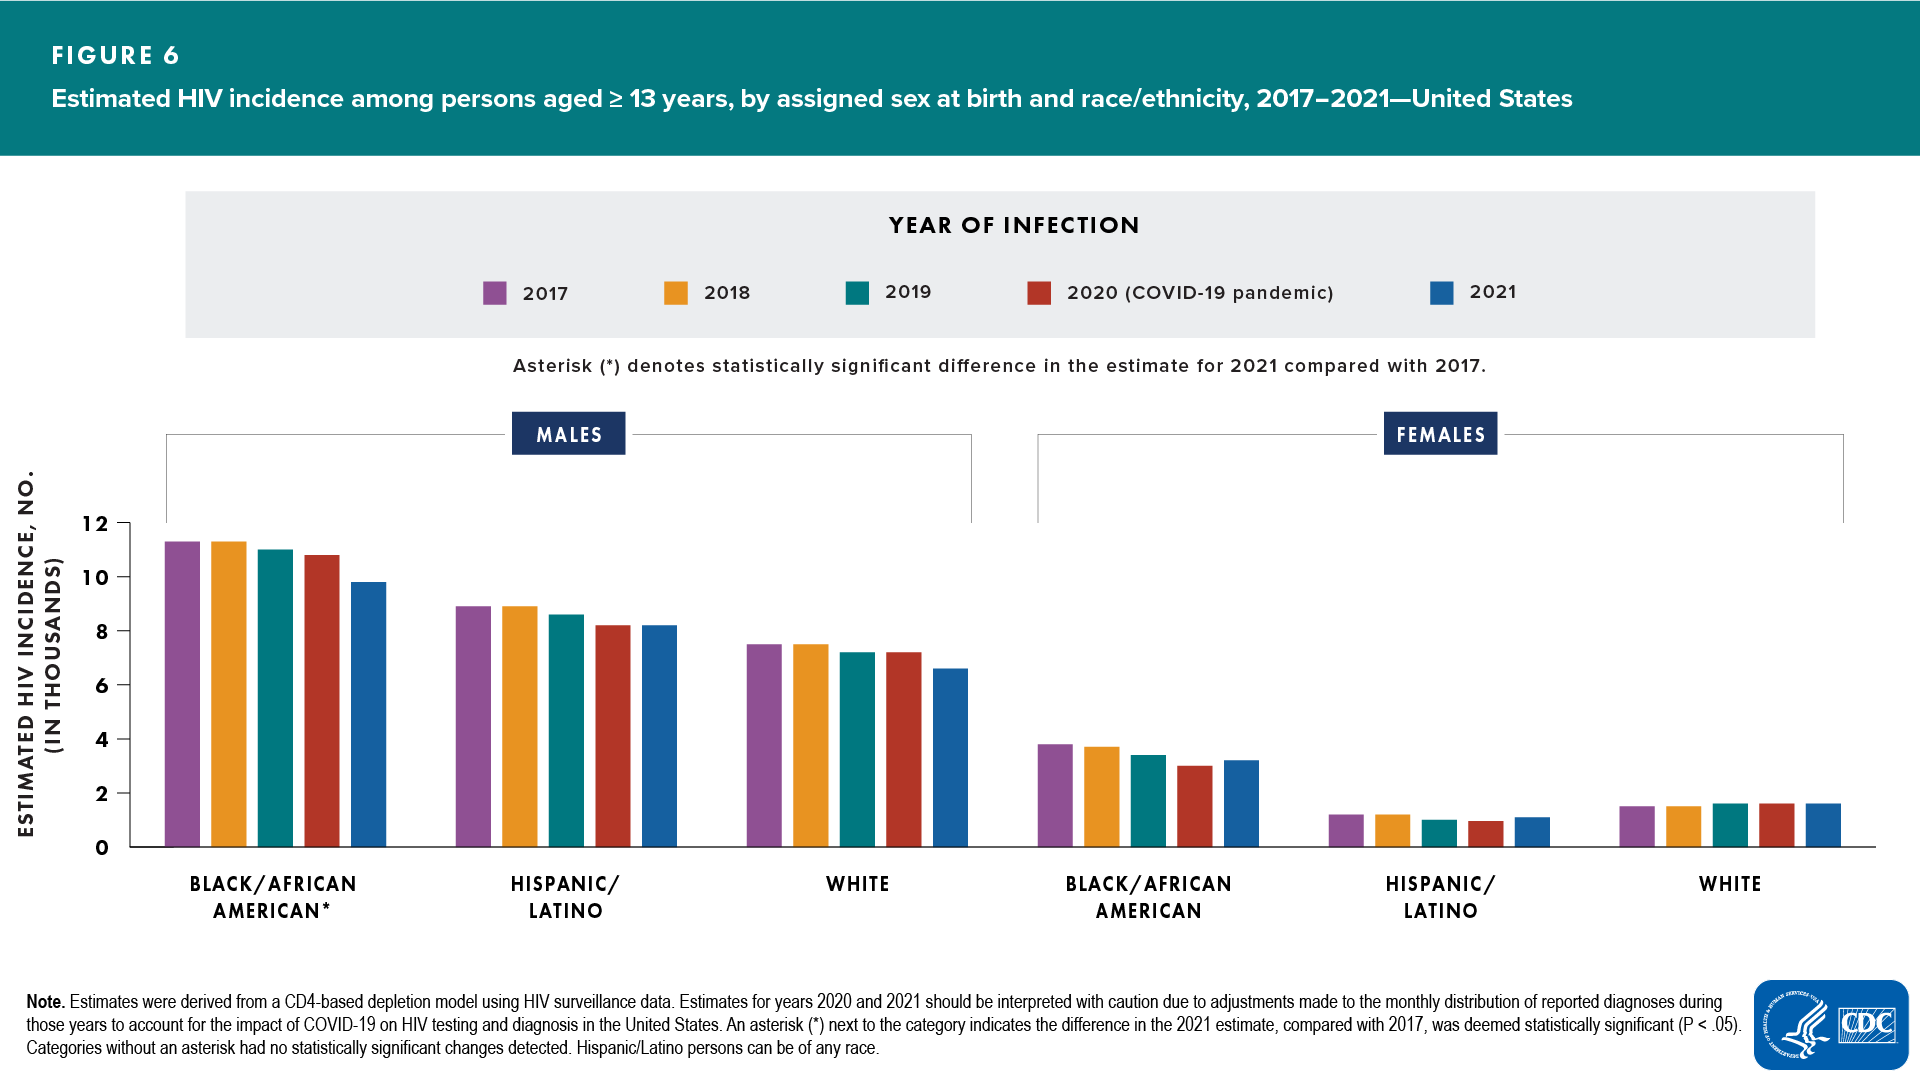 Figure 6. Estimated HIV incidence among persons aged ≥13 years, based on assigned sex at birth, by race/ethnicity, 2017–2021—United States